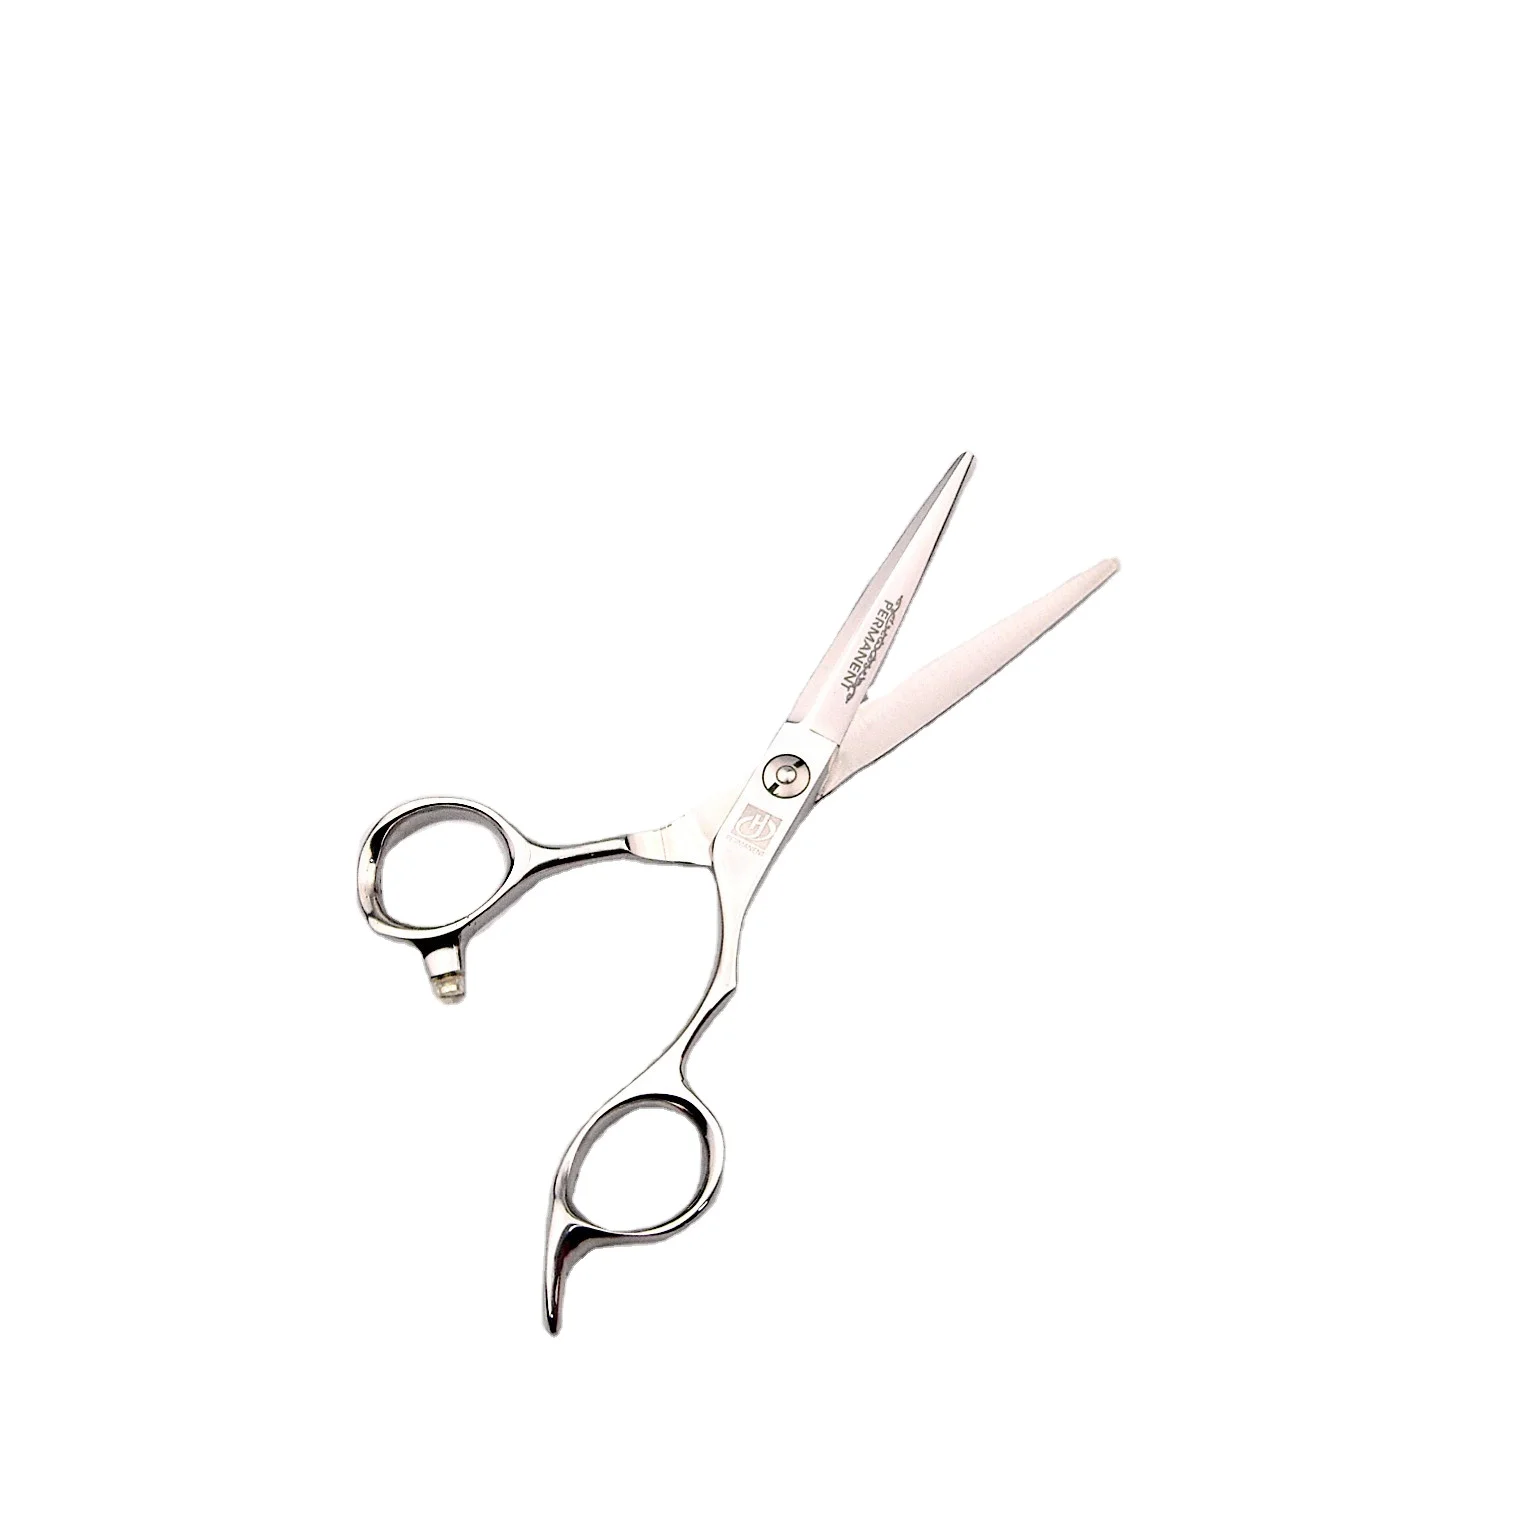 

High quality Salon Trimming 440C Stainless Steel Hair Barber Scissors for Tailor, Silver or other color you wanted